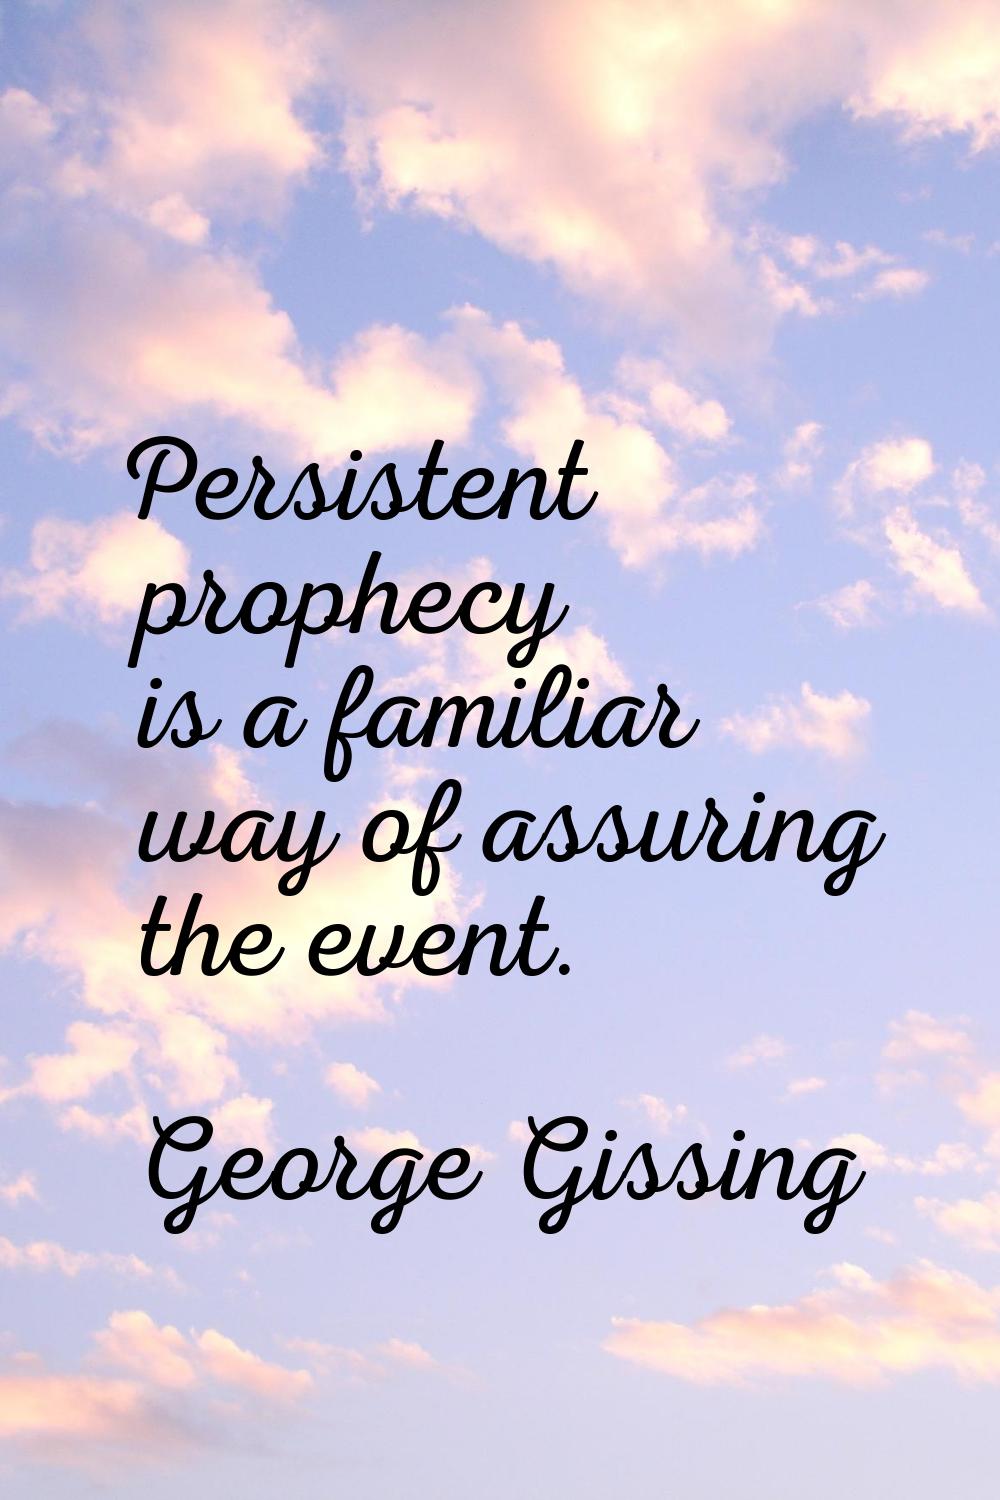 Persistent prophecy is a familiar way of assuring the event.